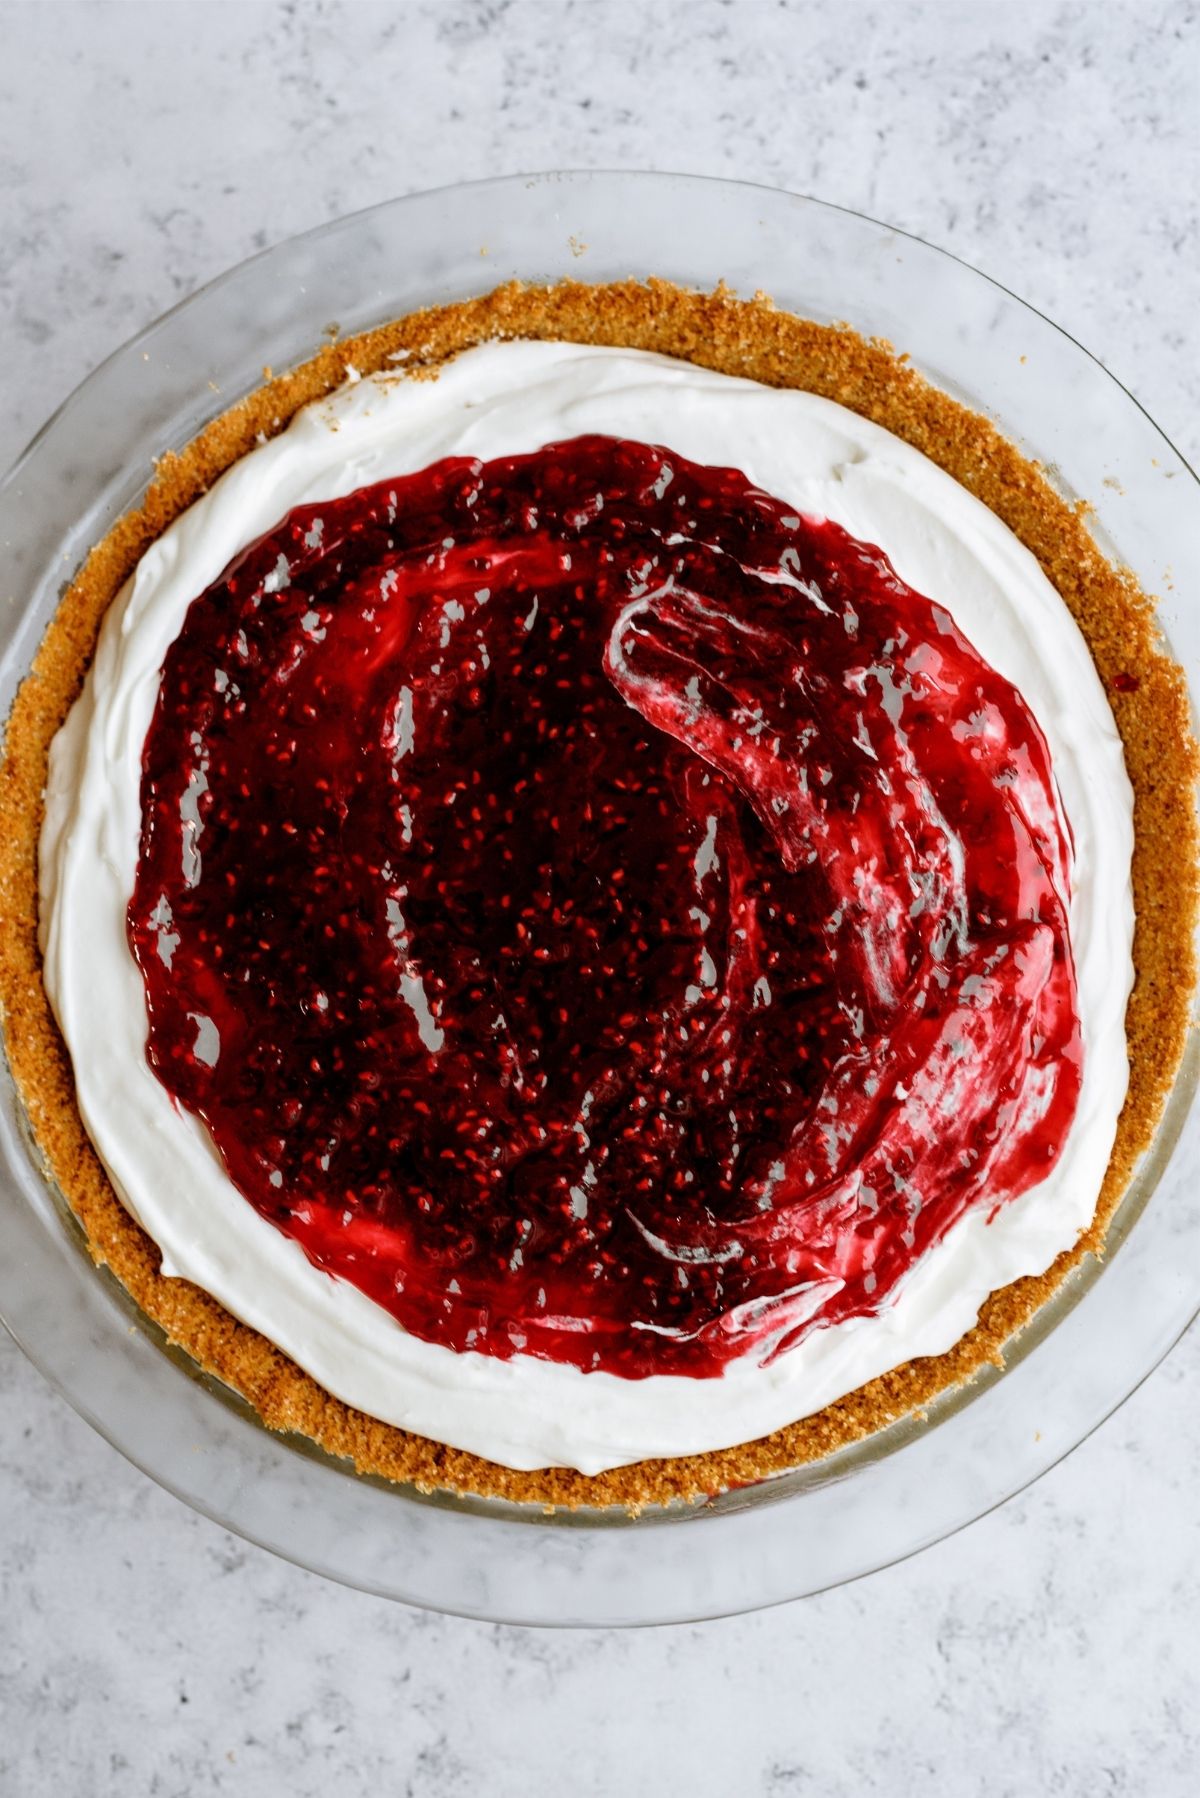 Chilled Raspberry Cream Cheese Pie in a pie plate